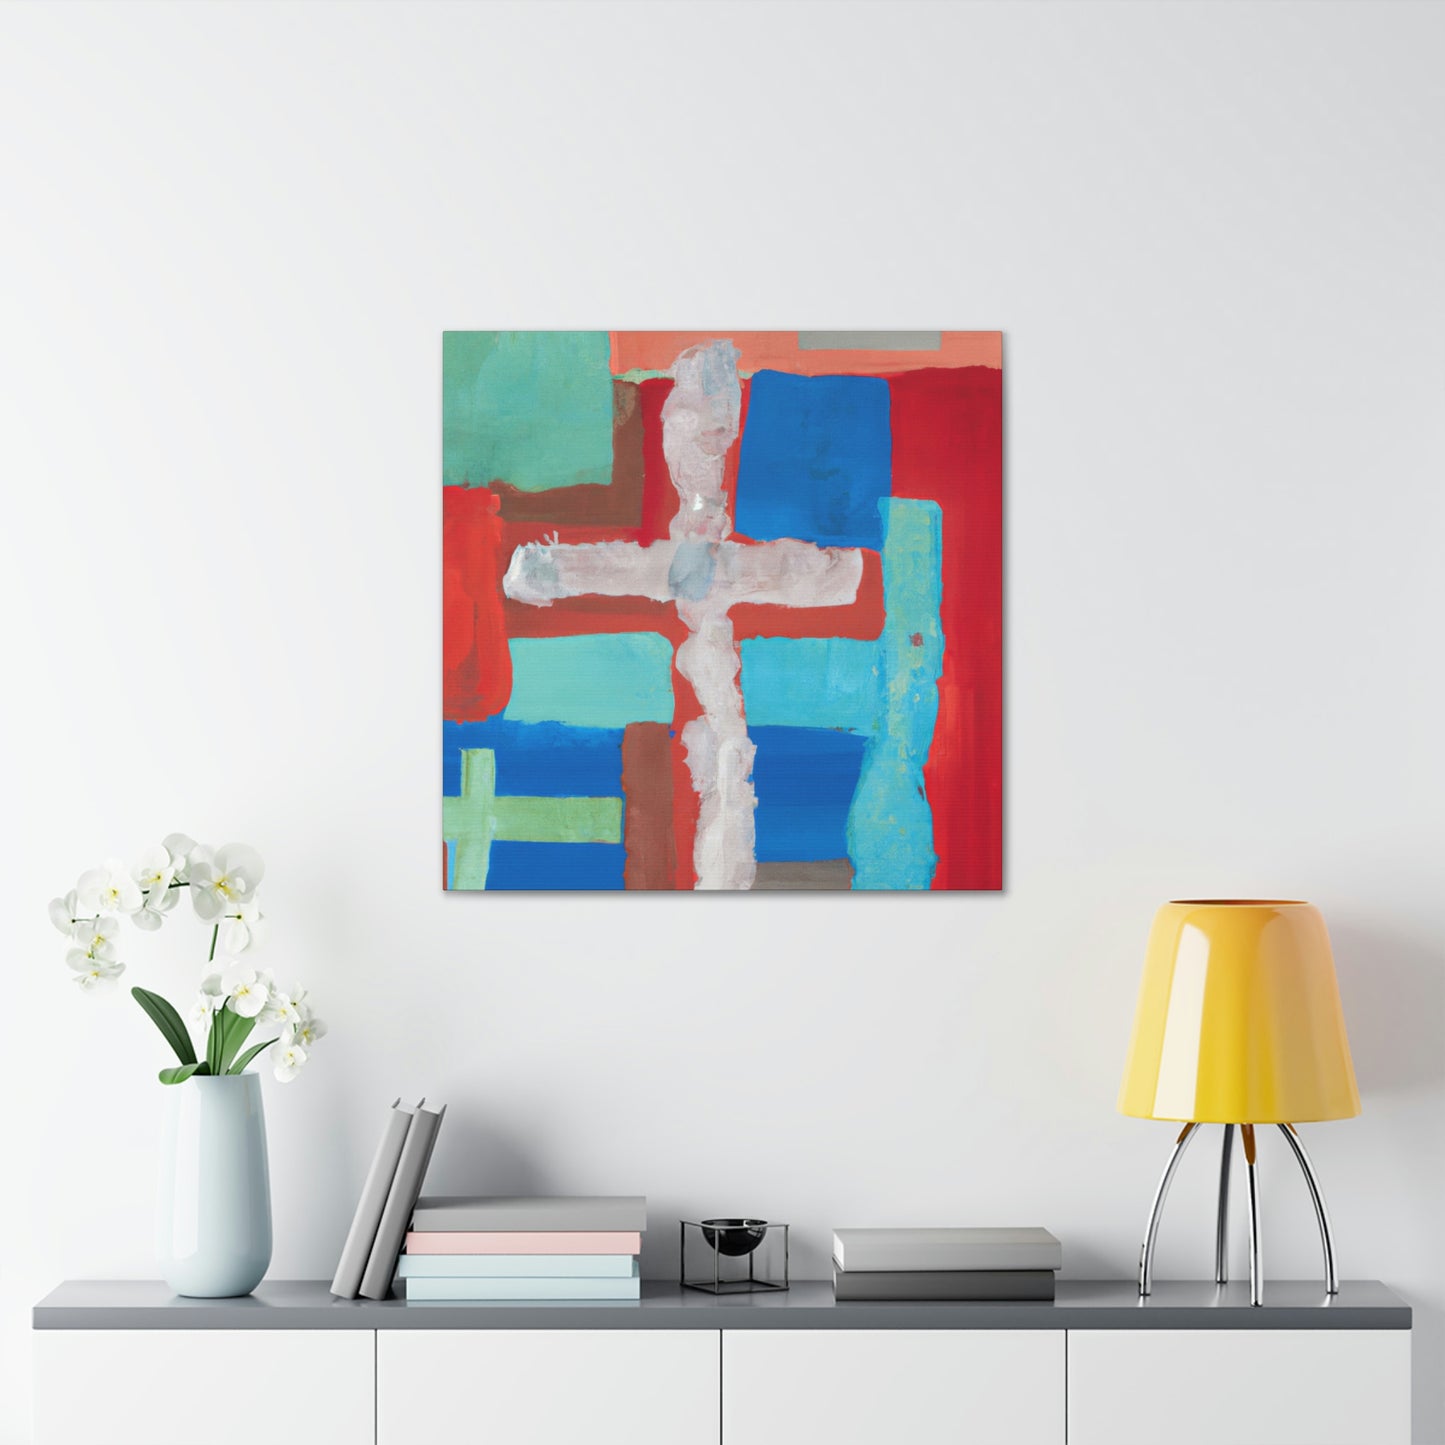 that has already been listed.

Hebrews 13:8 
"Jesus Christ is the same yesterday, today, and forever." - Canvas Wall Art